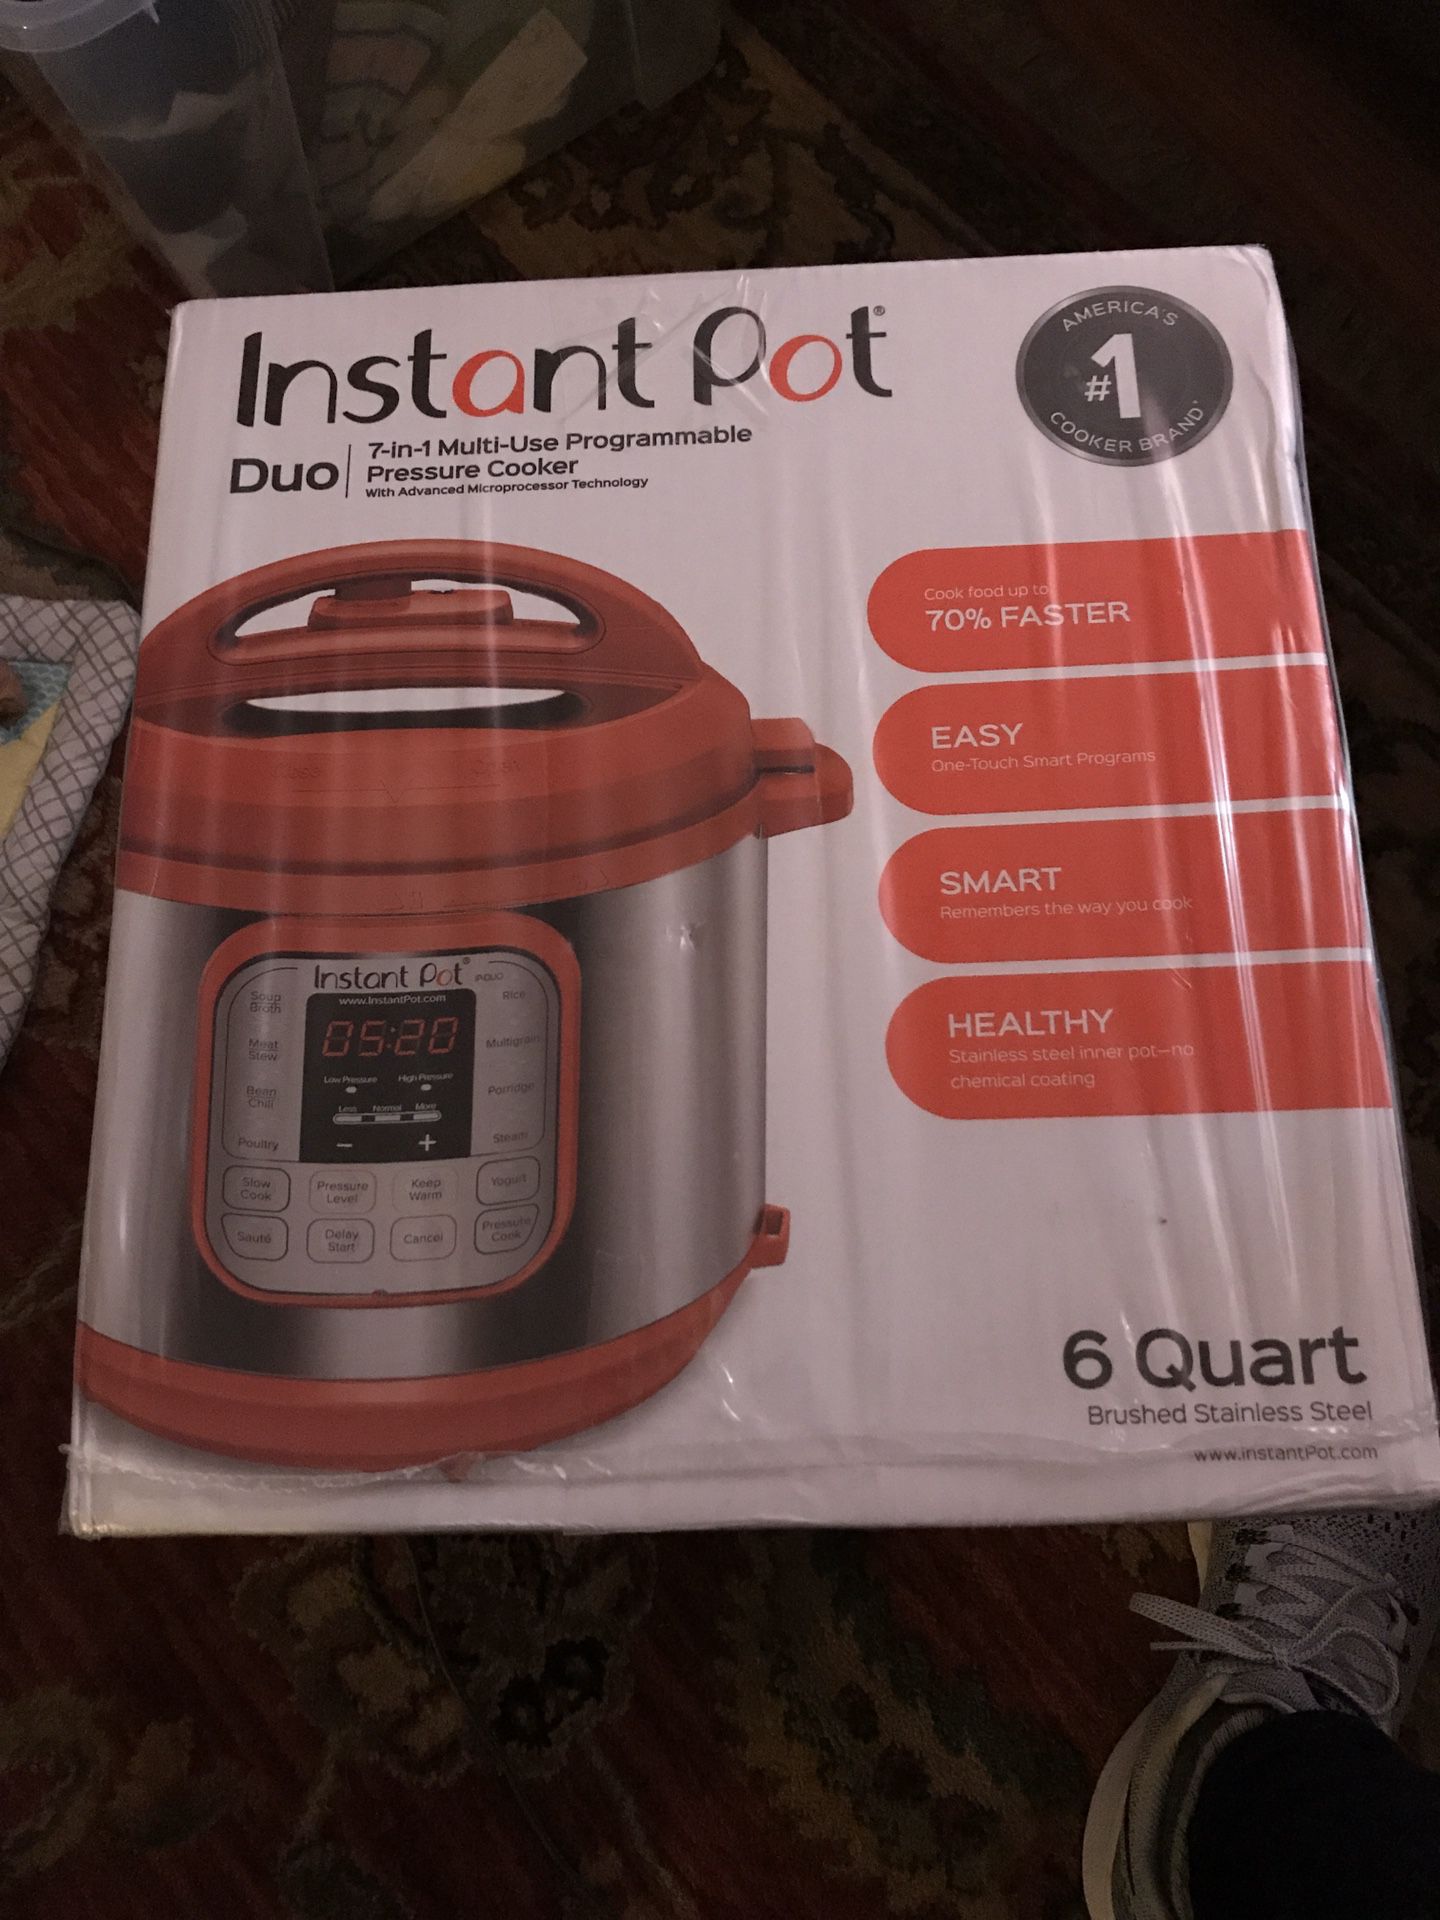 Instant Pot Duo + 4 yr Amazon Warrenty selling on Amazon for $99+ $15 for warranty